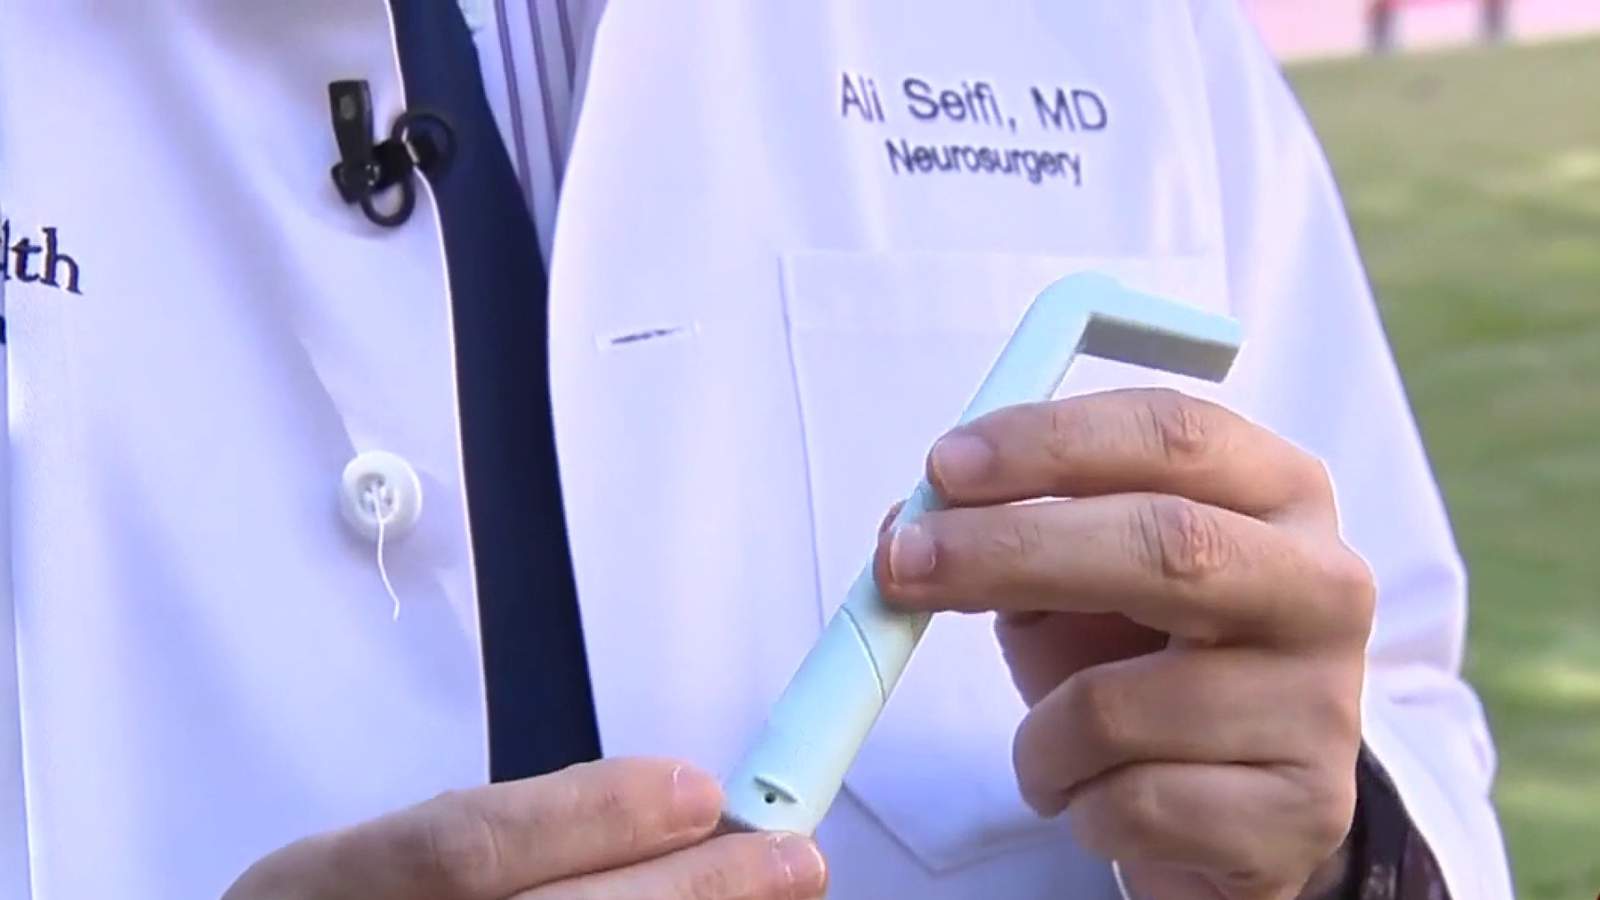 UT Health San Antonio physician develops device to relieve hiccups